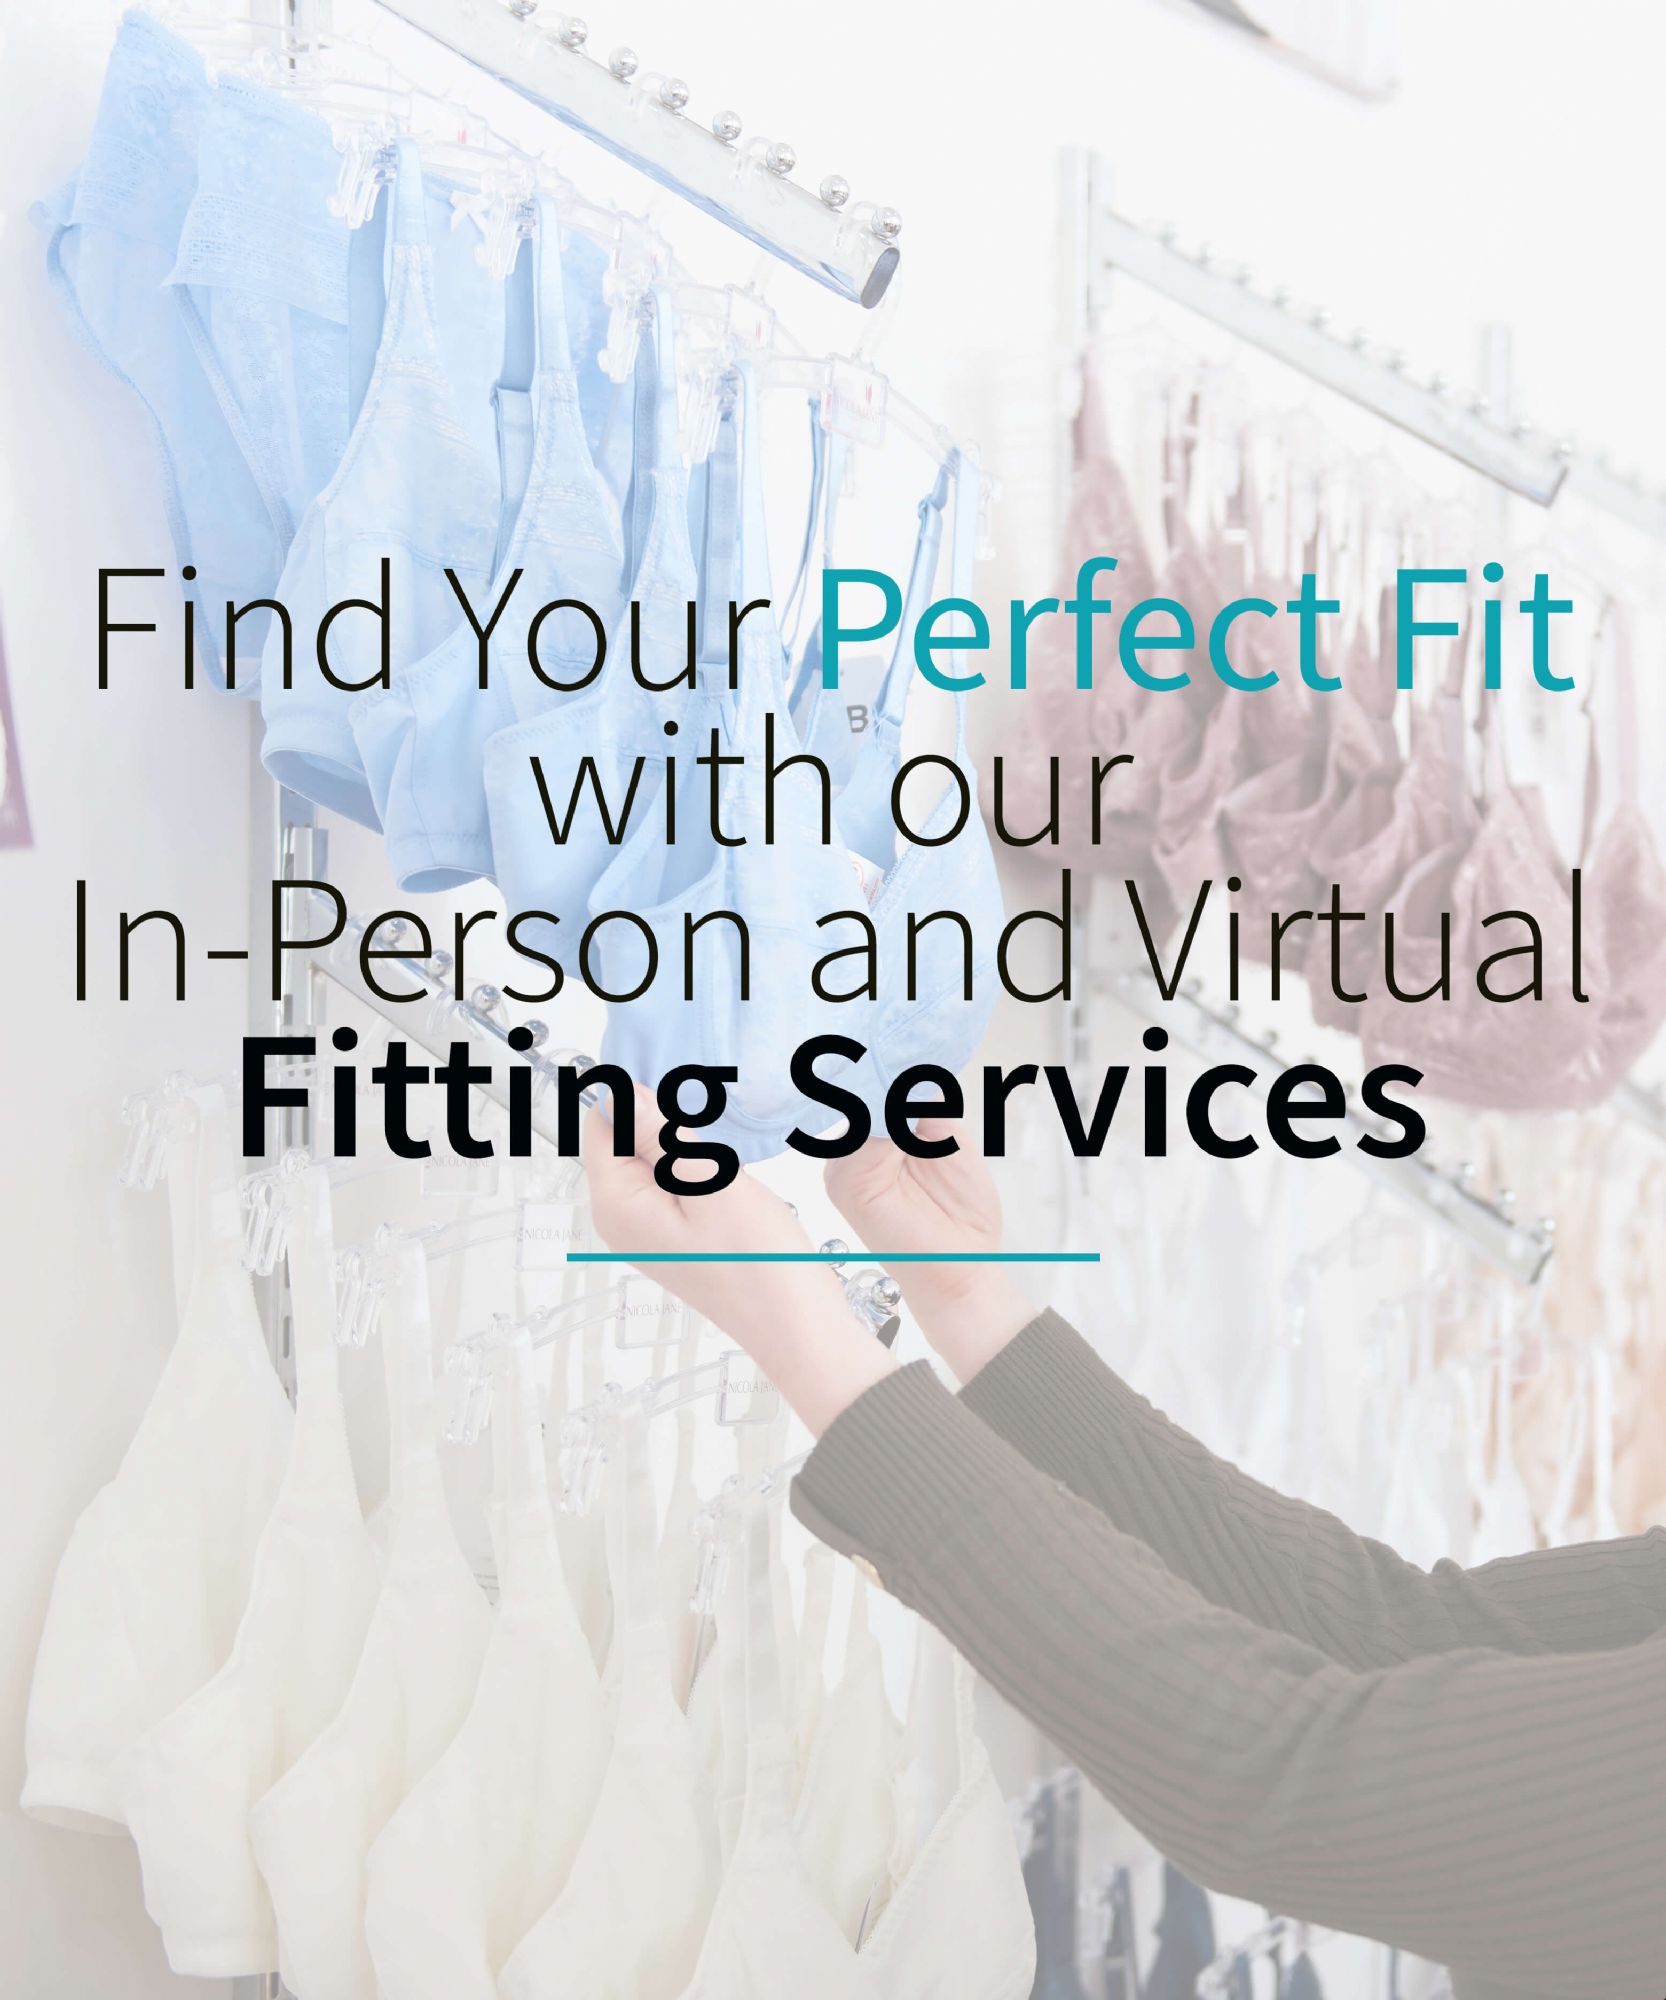 Fitting Services